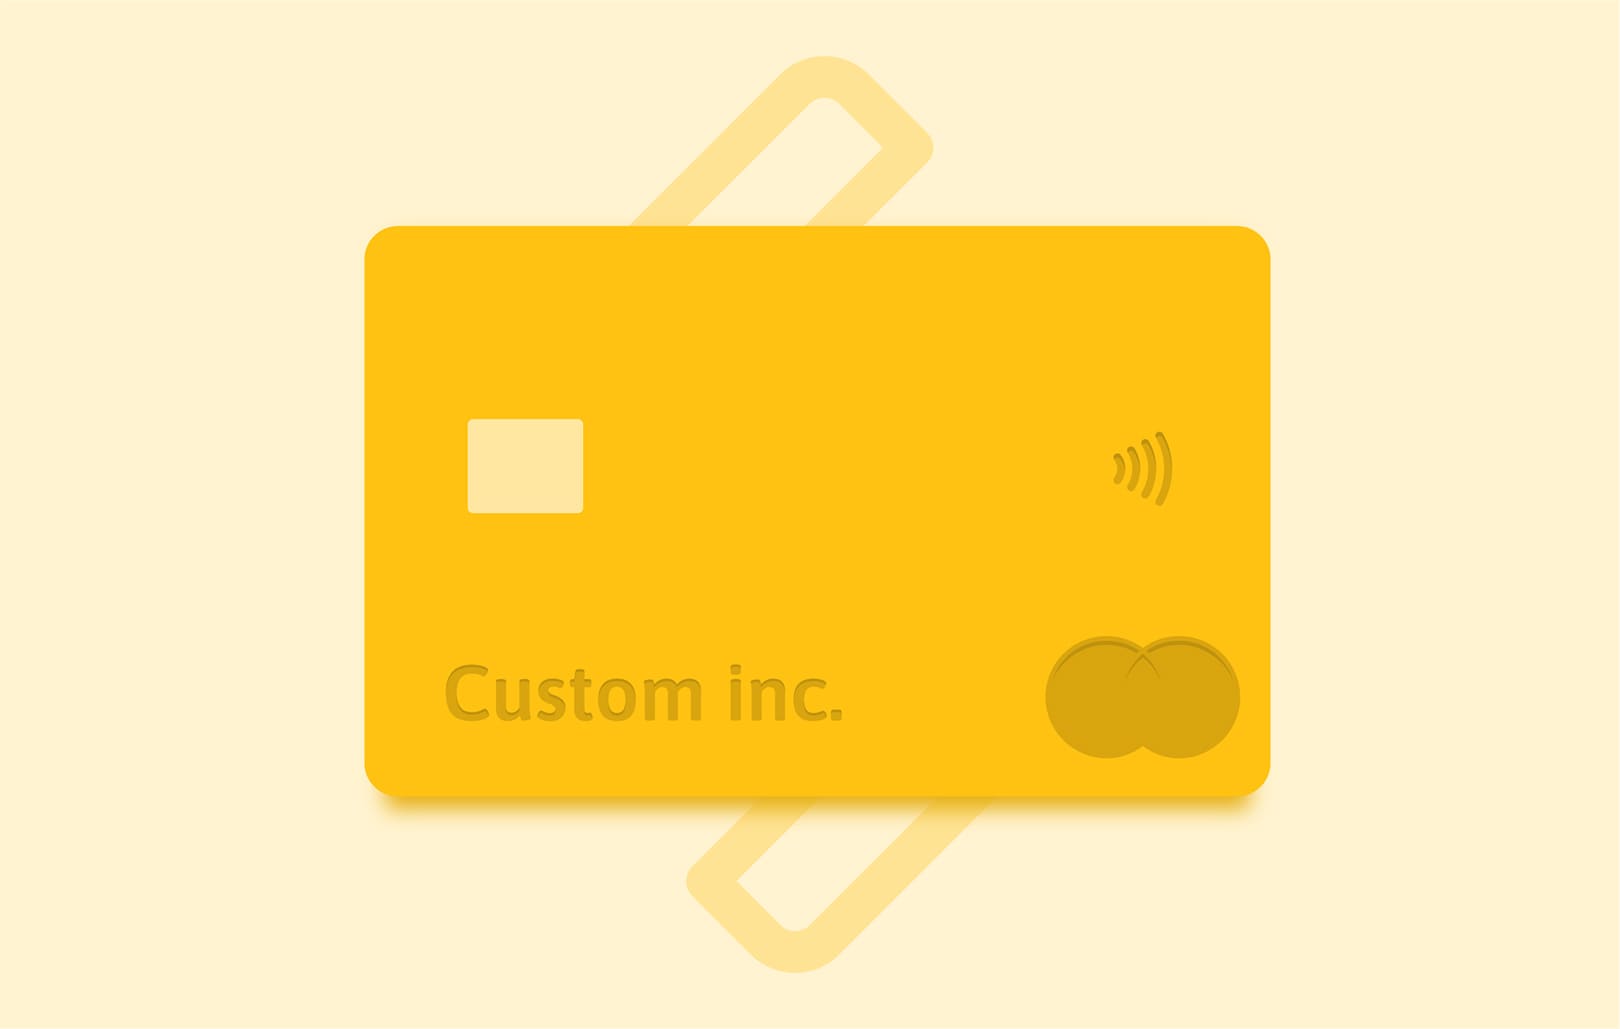 Branded Payment Cards in Your Corporate Design